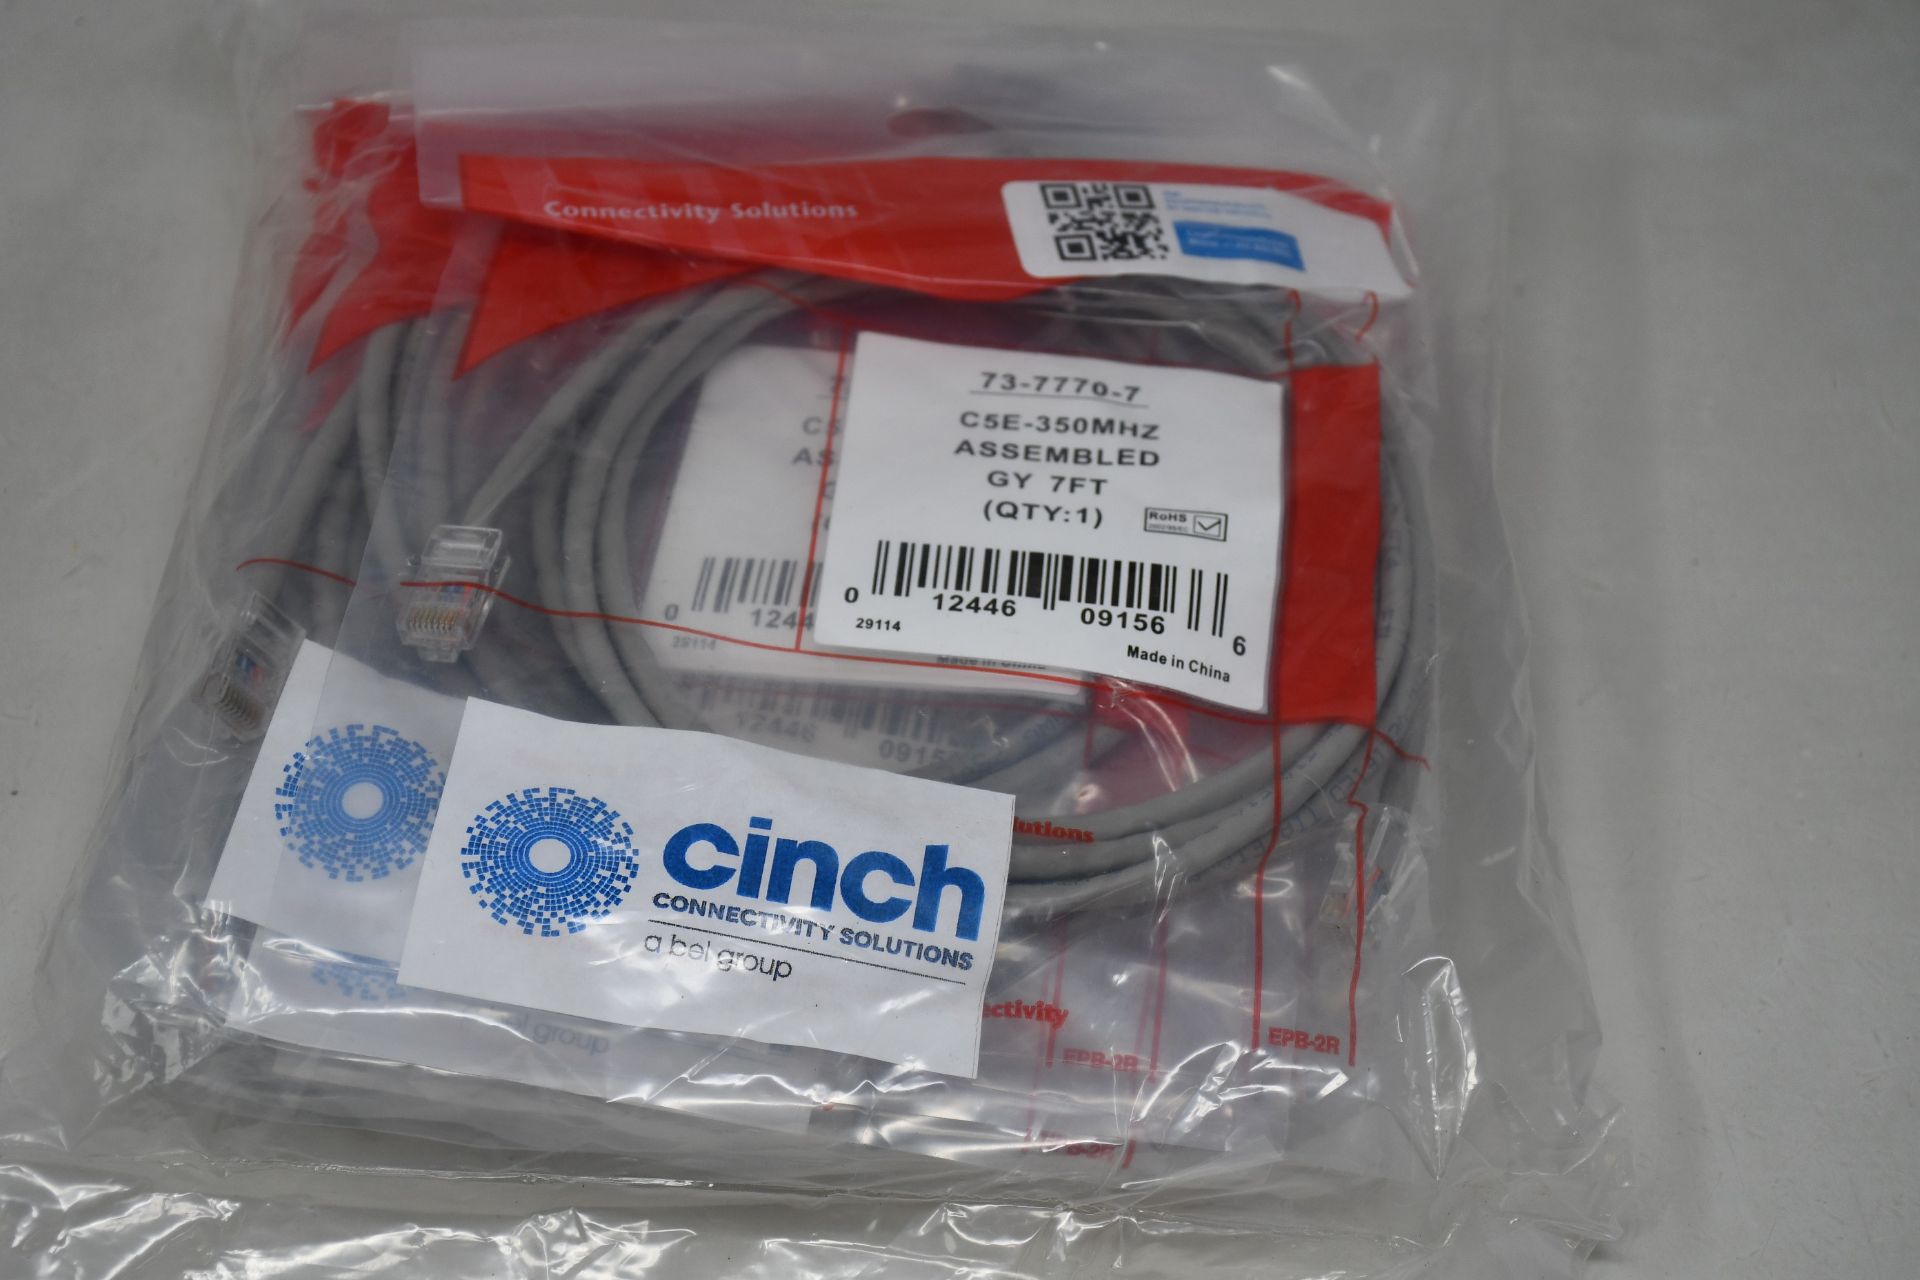 Five packs of ten as new 73-7770-7 Ethernet/Networking Cables in grey (7', C5E-350MHZ).